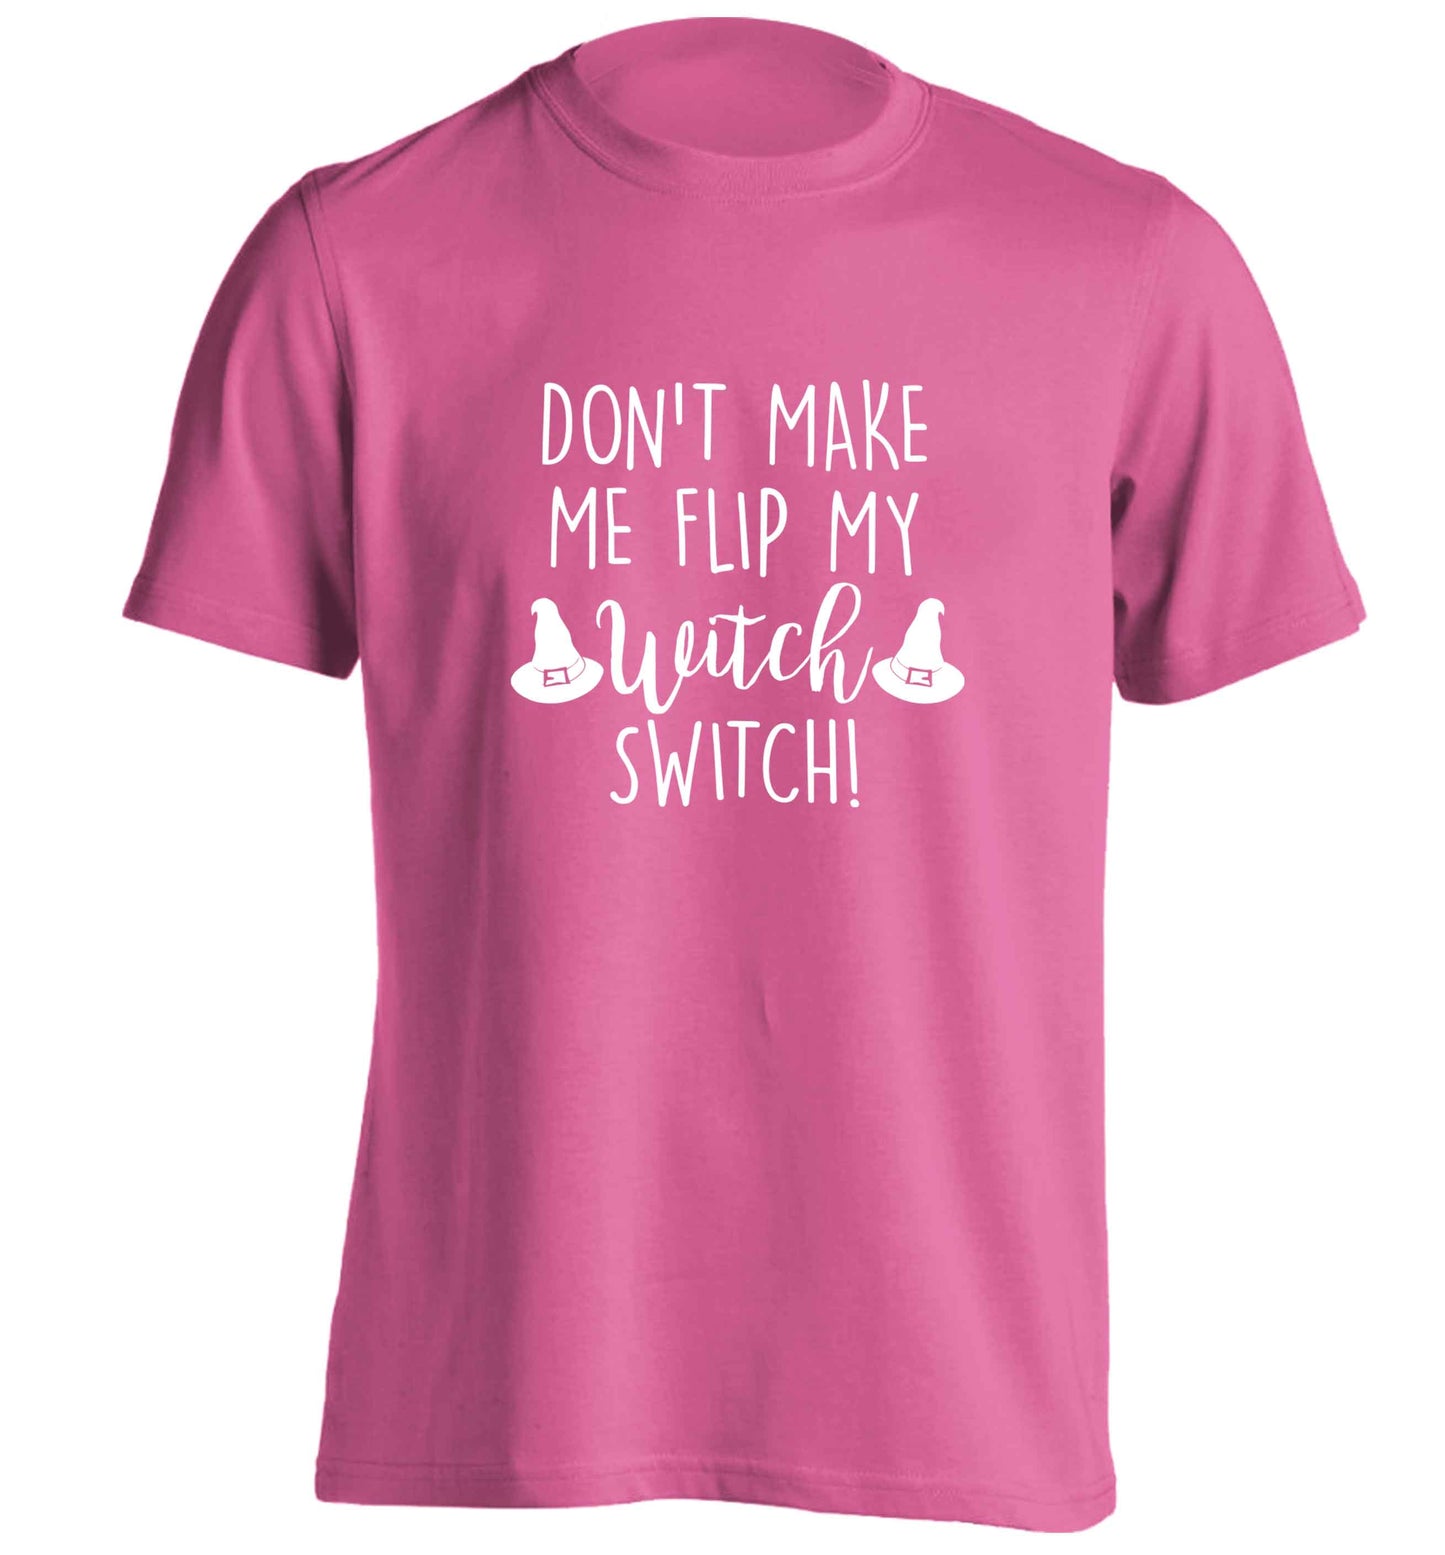 Don't make me flip my witch switch adults unisex pink Tshirt 2XL